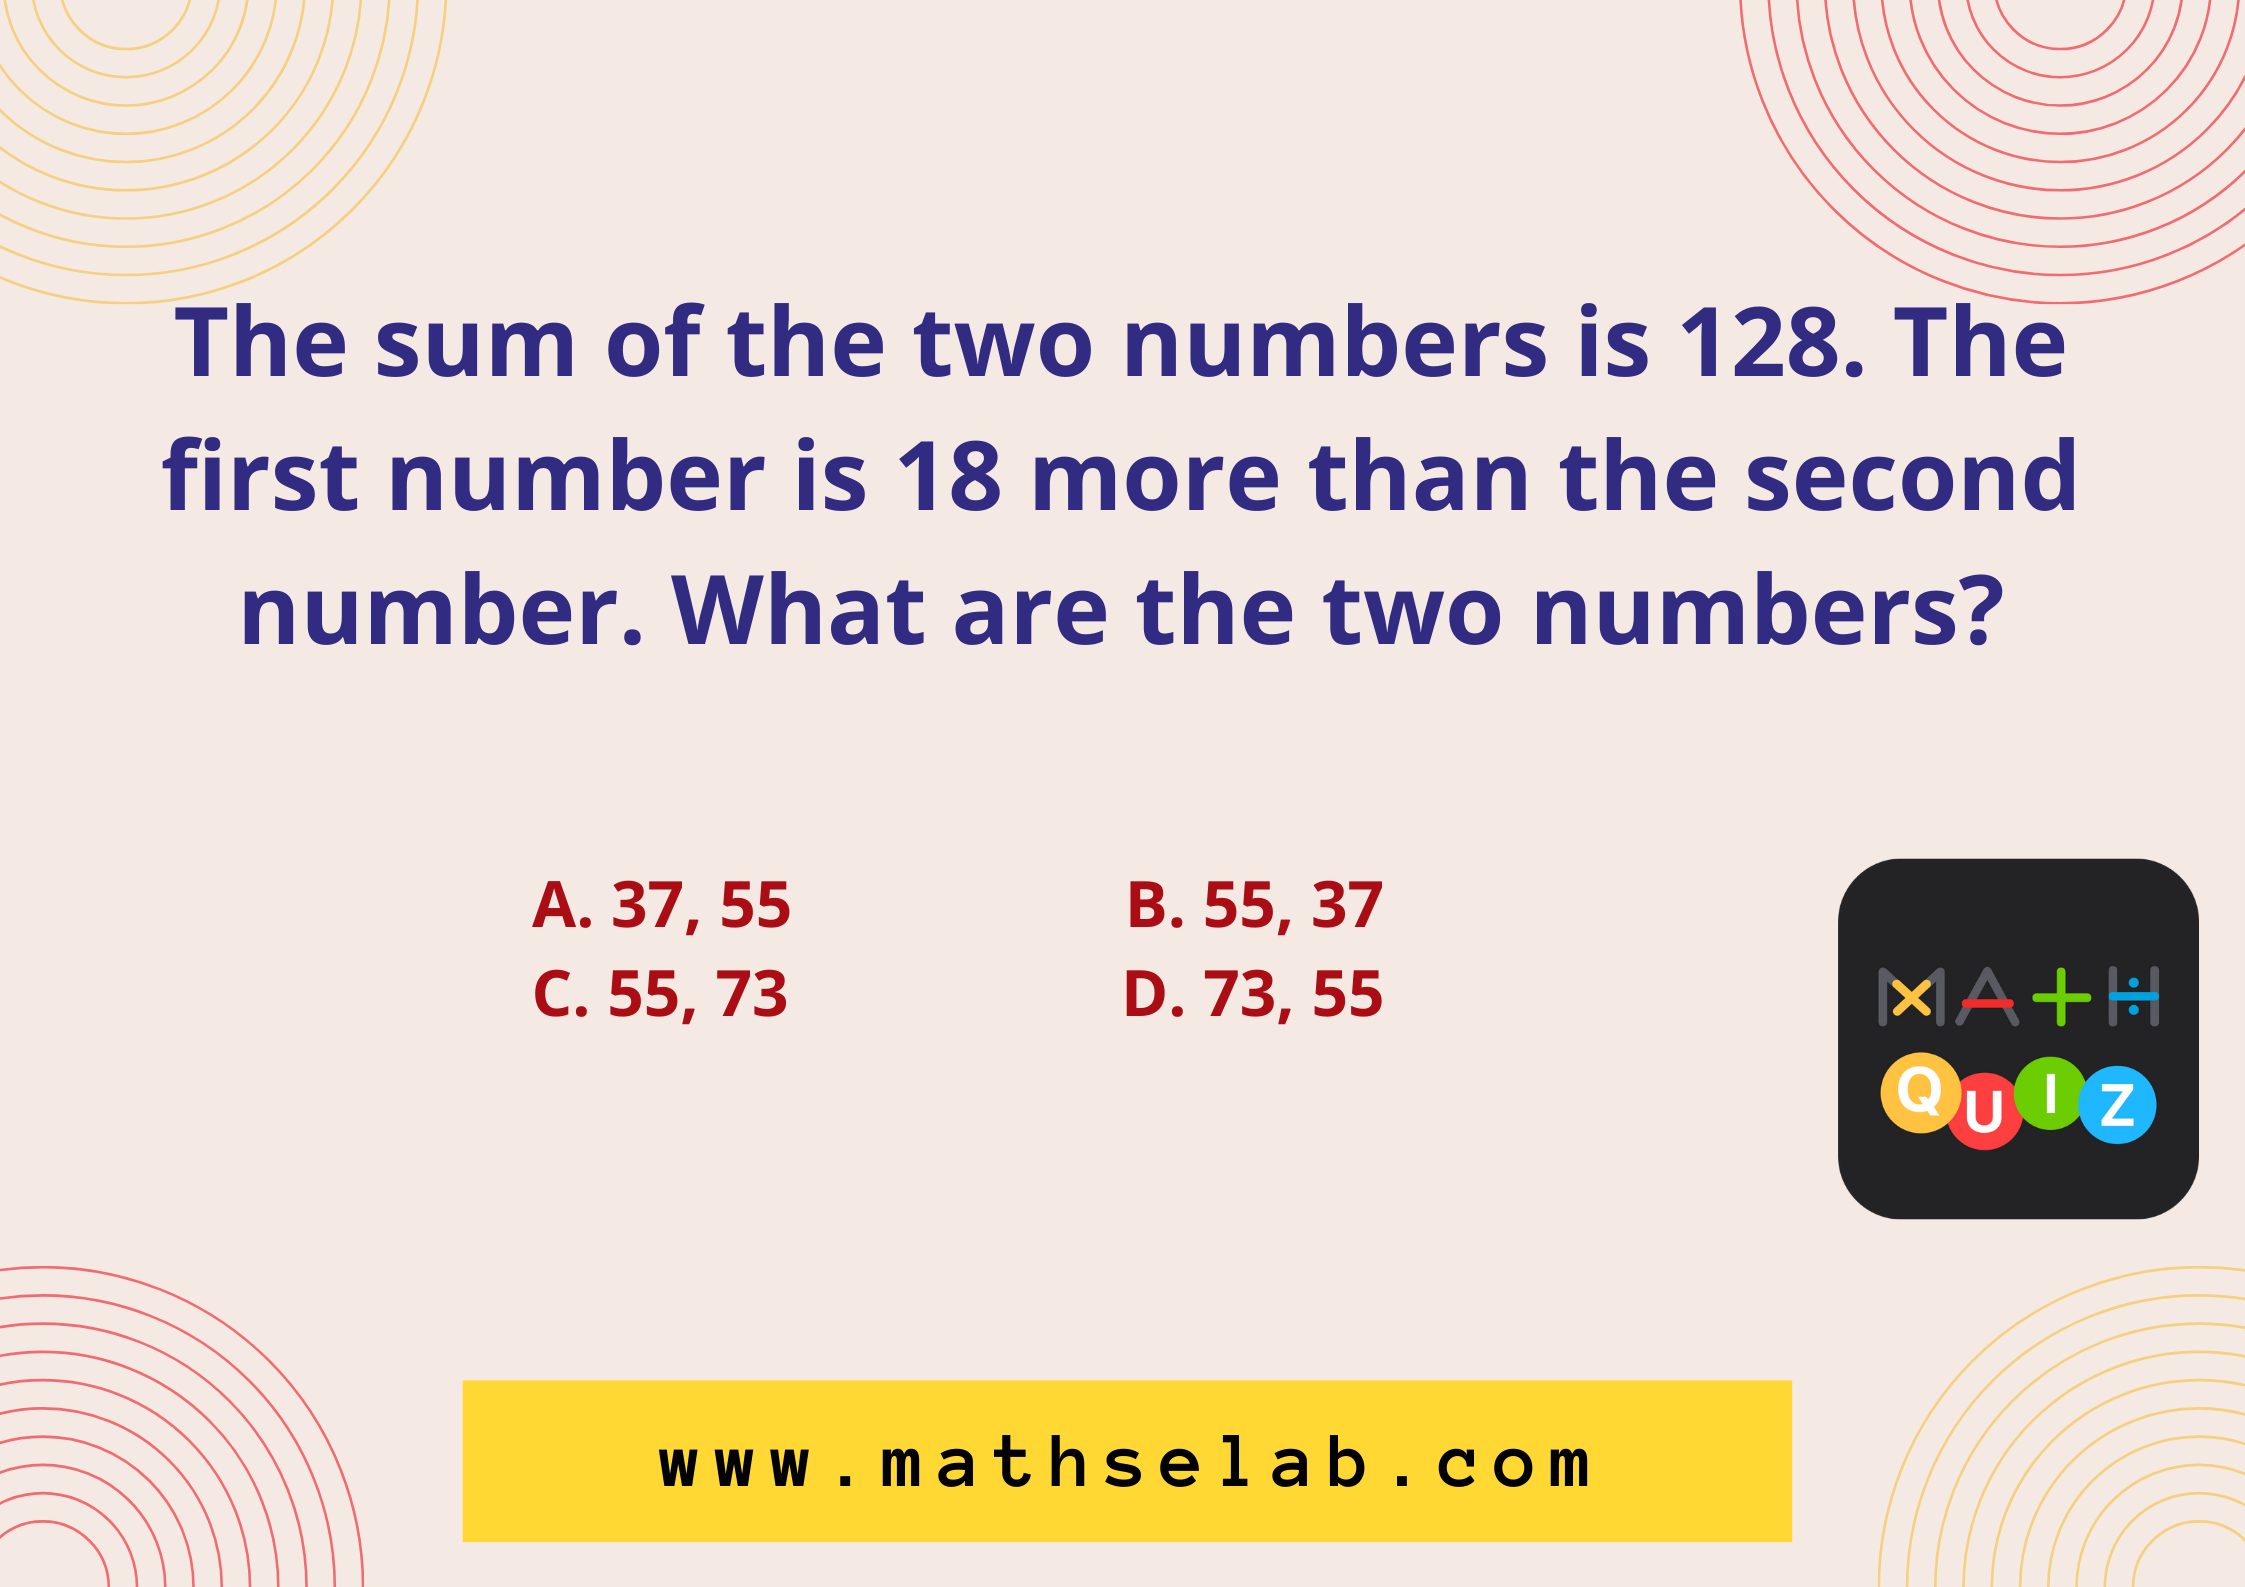 The sum of the two numbers is 128. The first number is 18 more than the second number. What are the two numbers?